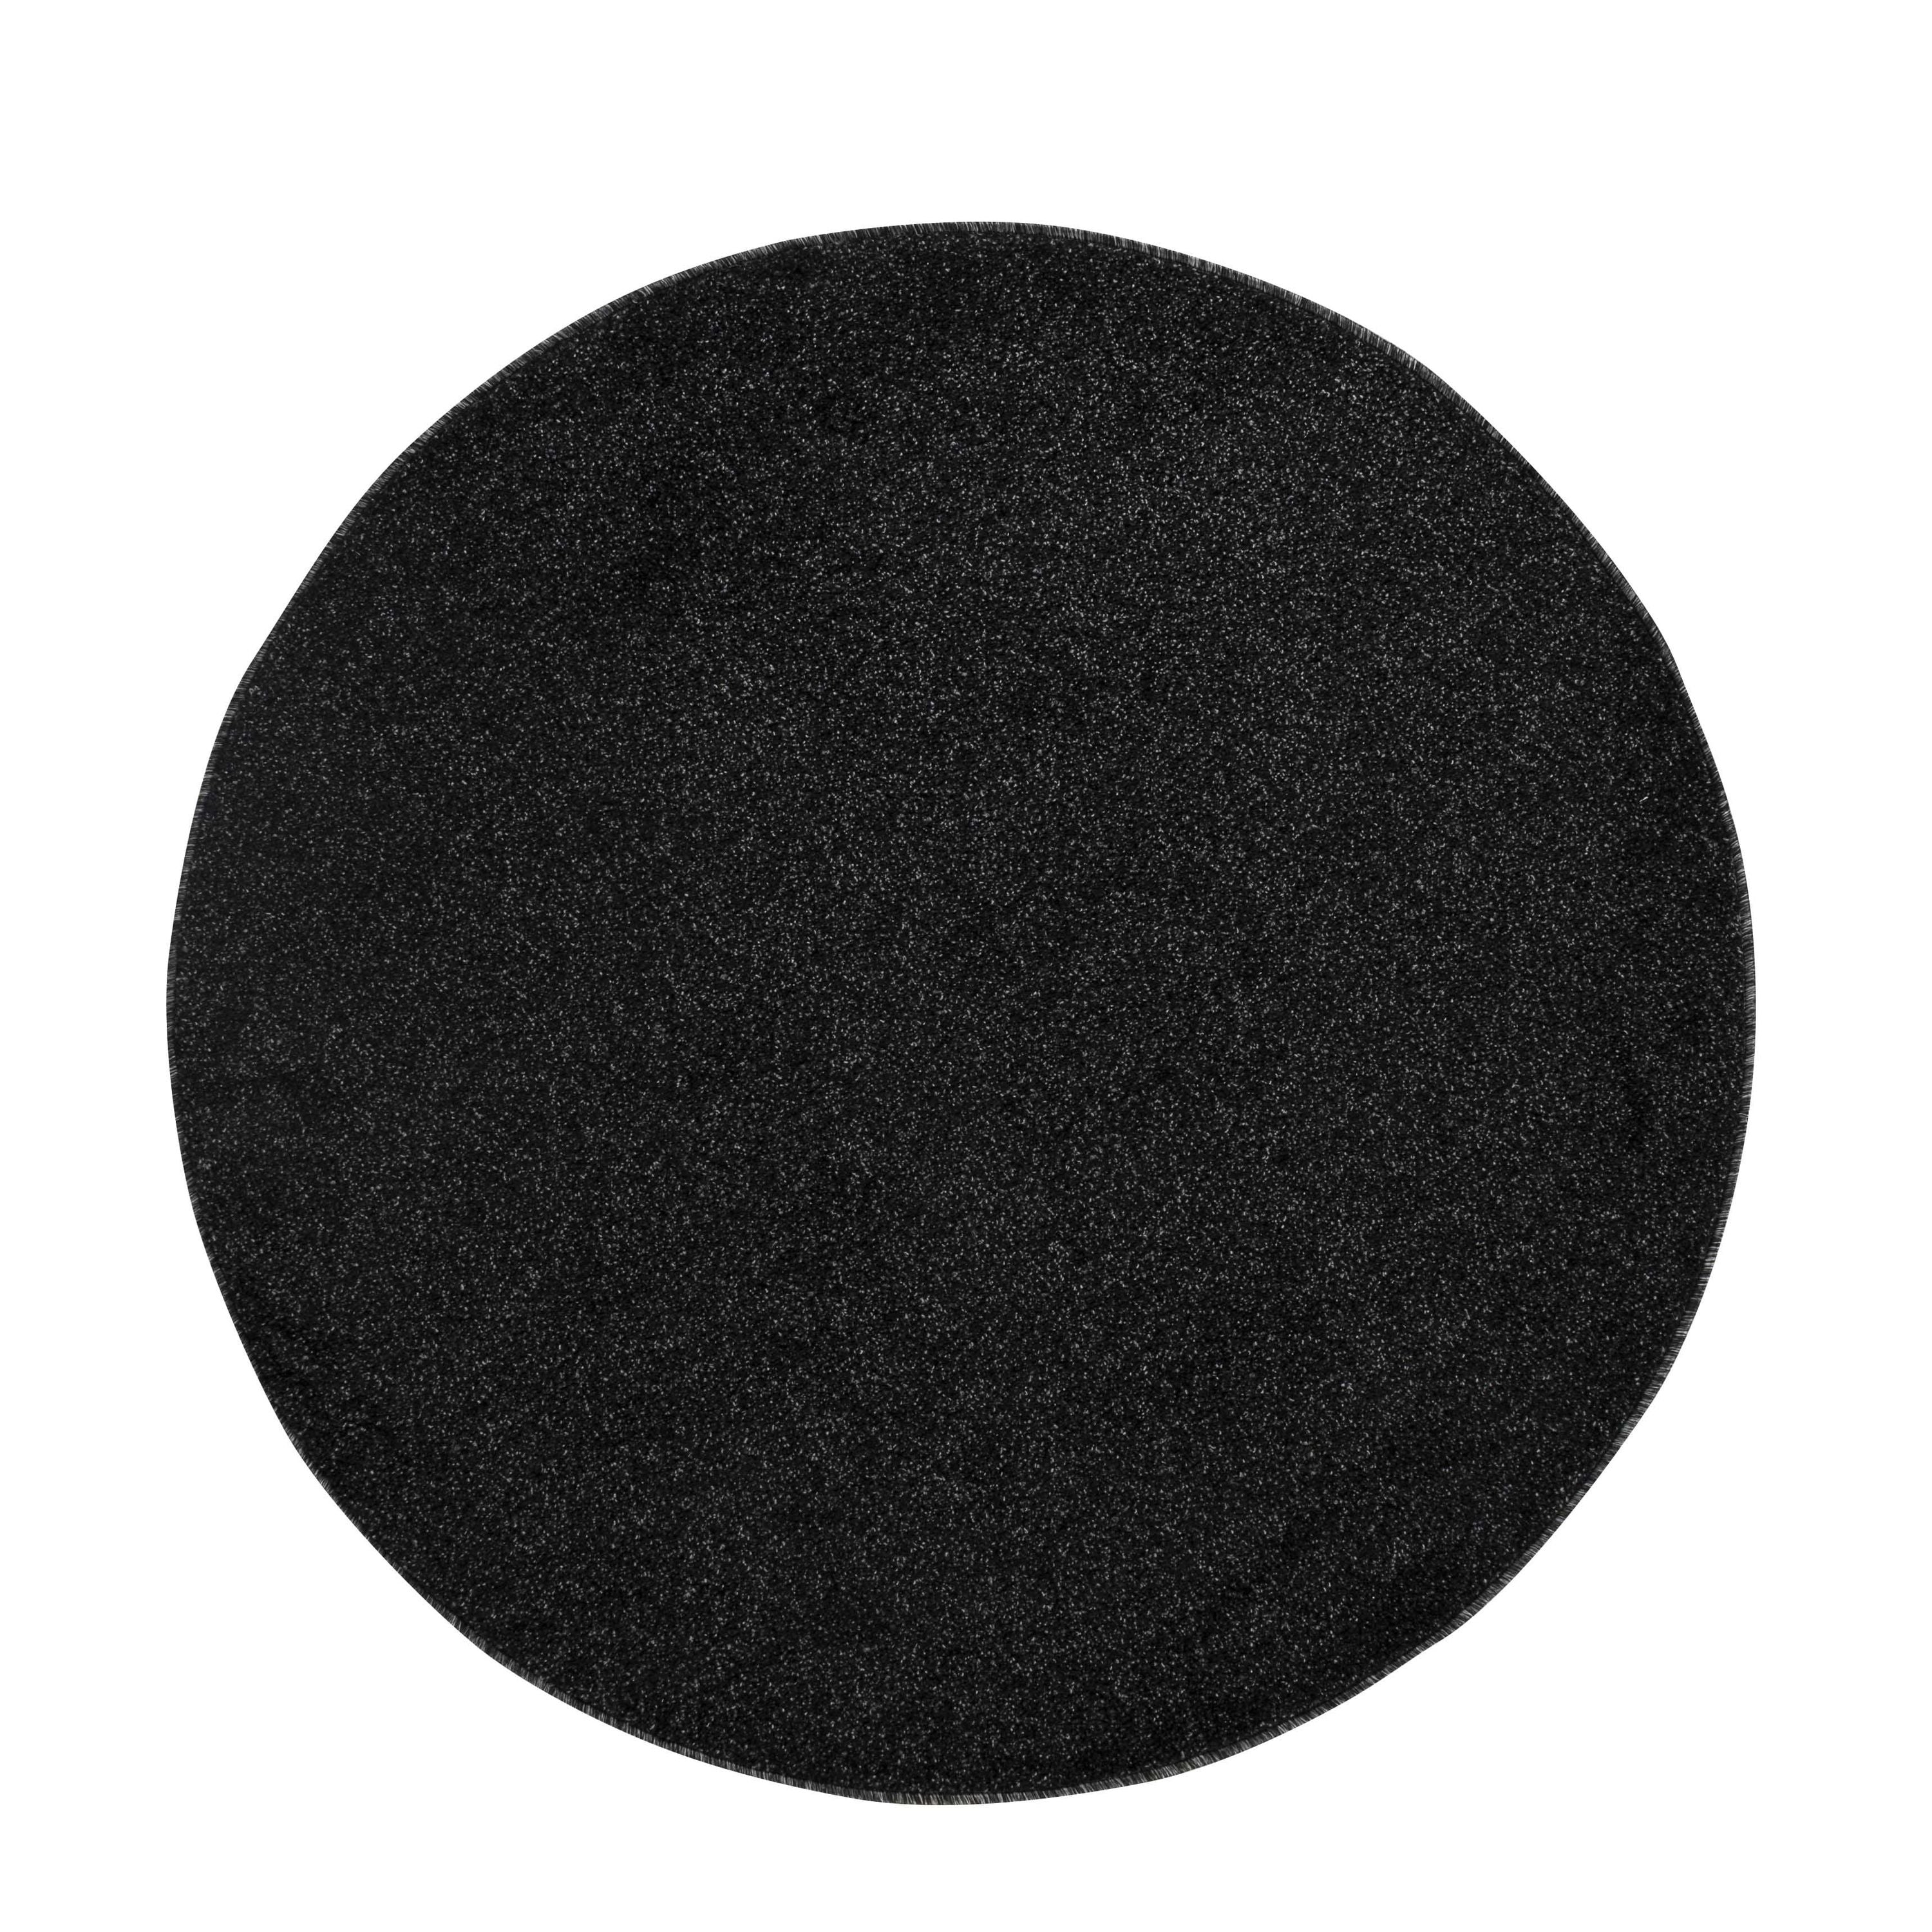 Plain short pile round rug for living room in various colors and sizes